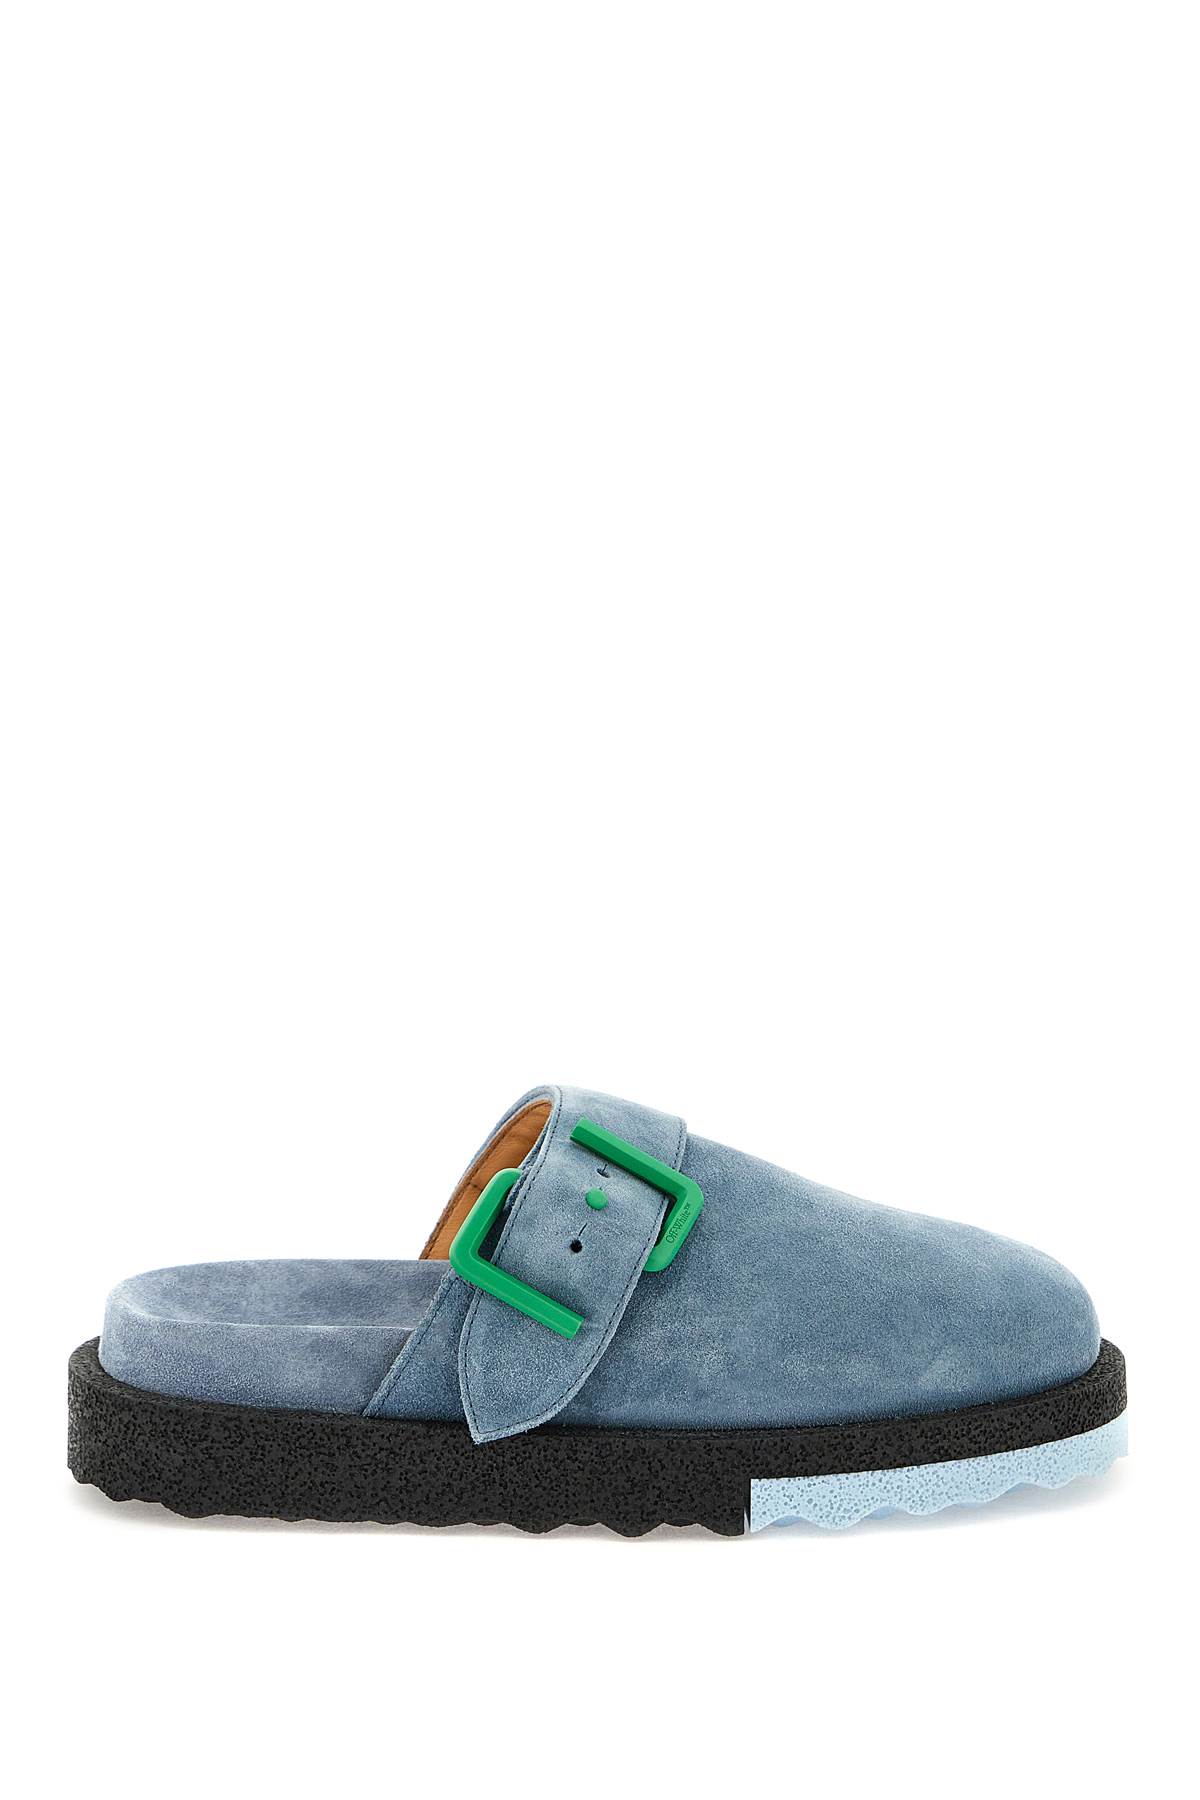 Off-White Suede Leather Sponge Clogs